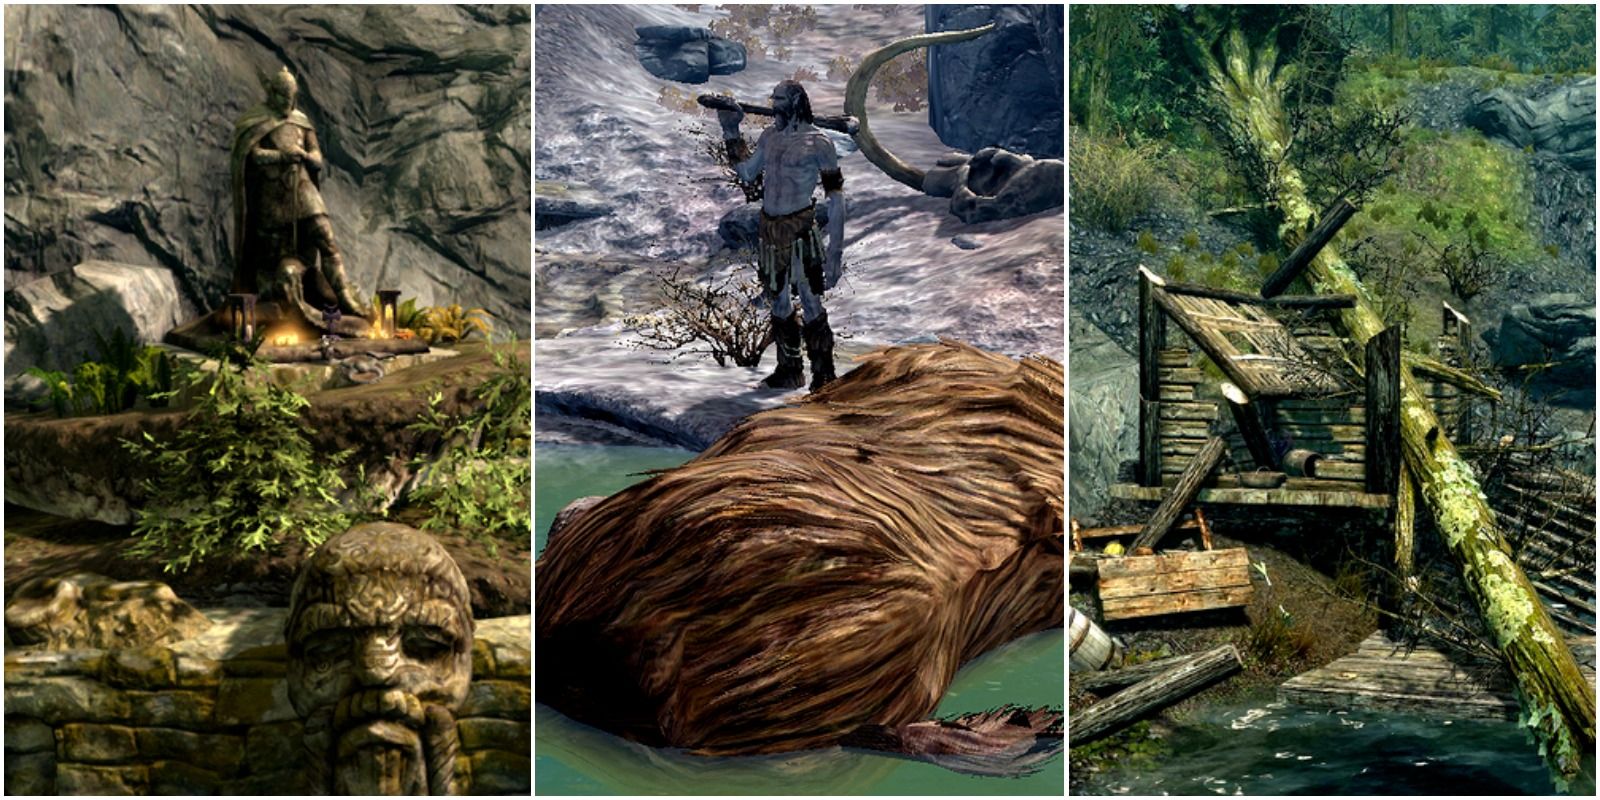 left: shrine of talos. center: giant and mammoth corpse. right: lorenzs broken shack under a fallen tree.